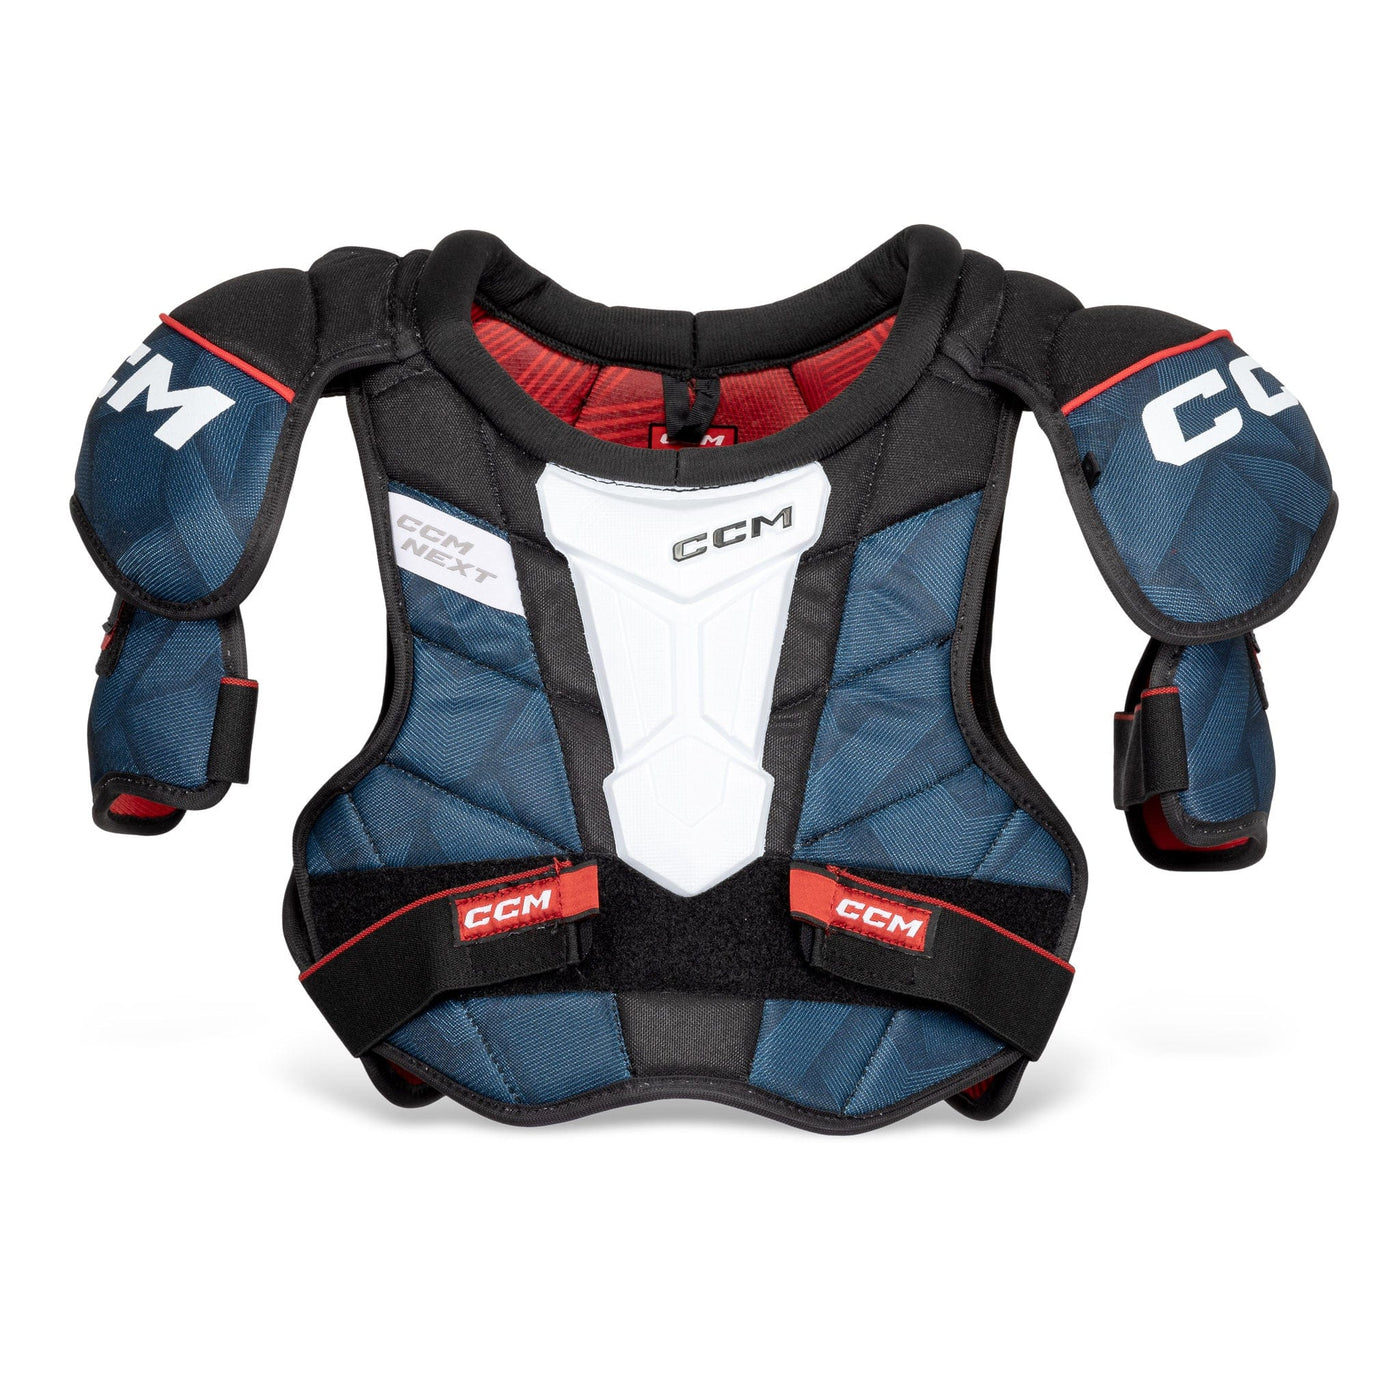 CCM Next Youth Hockey Shoulder Pads - The Hockey Shop Source For Sports